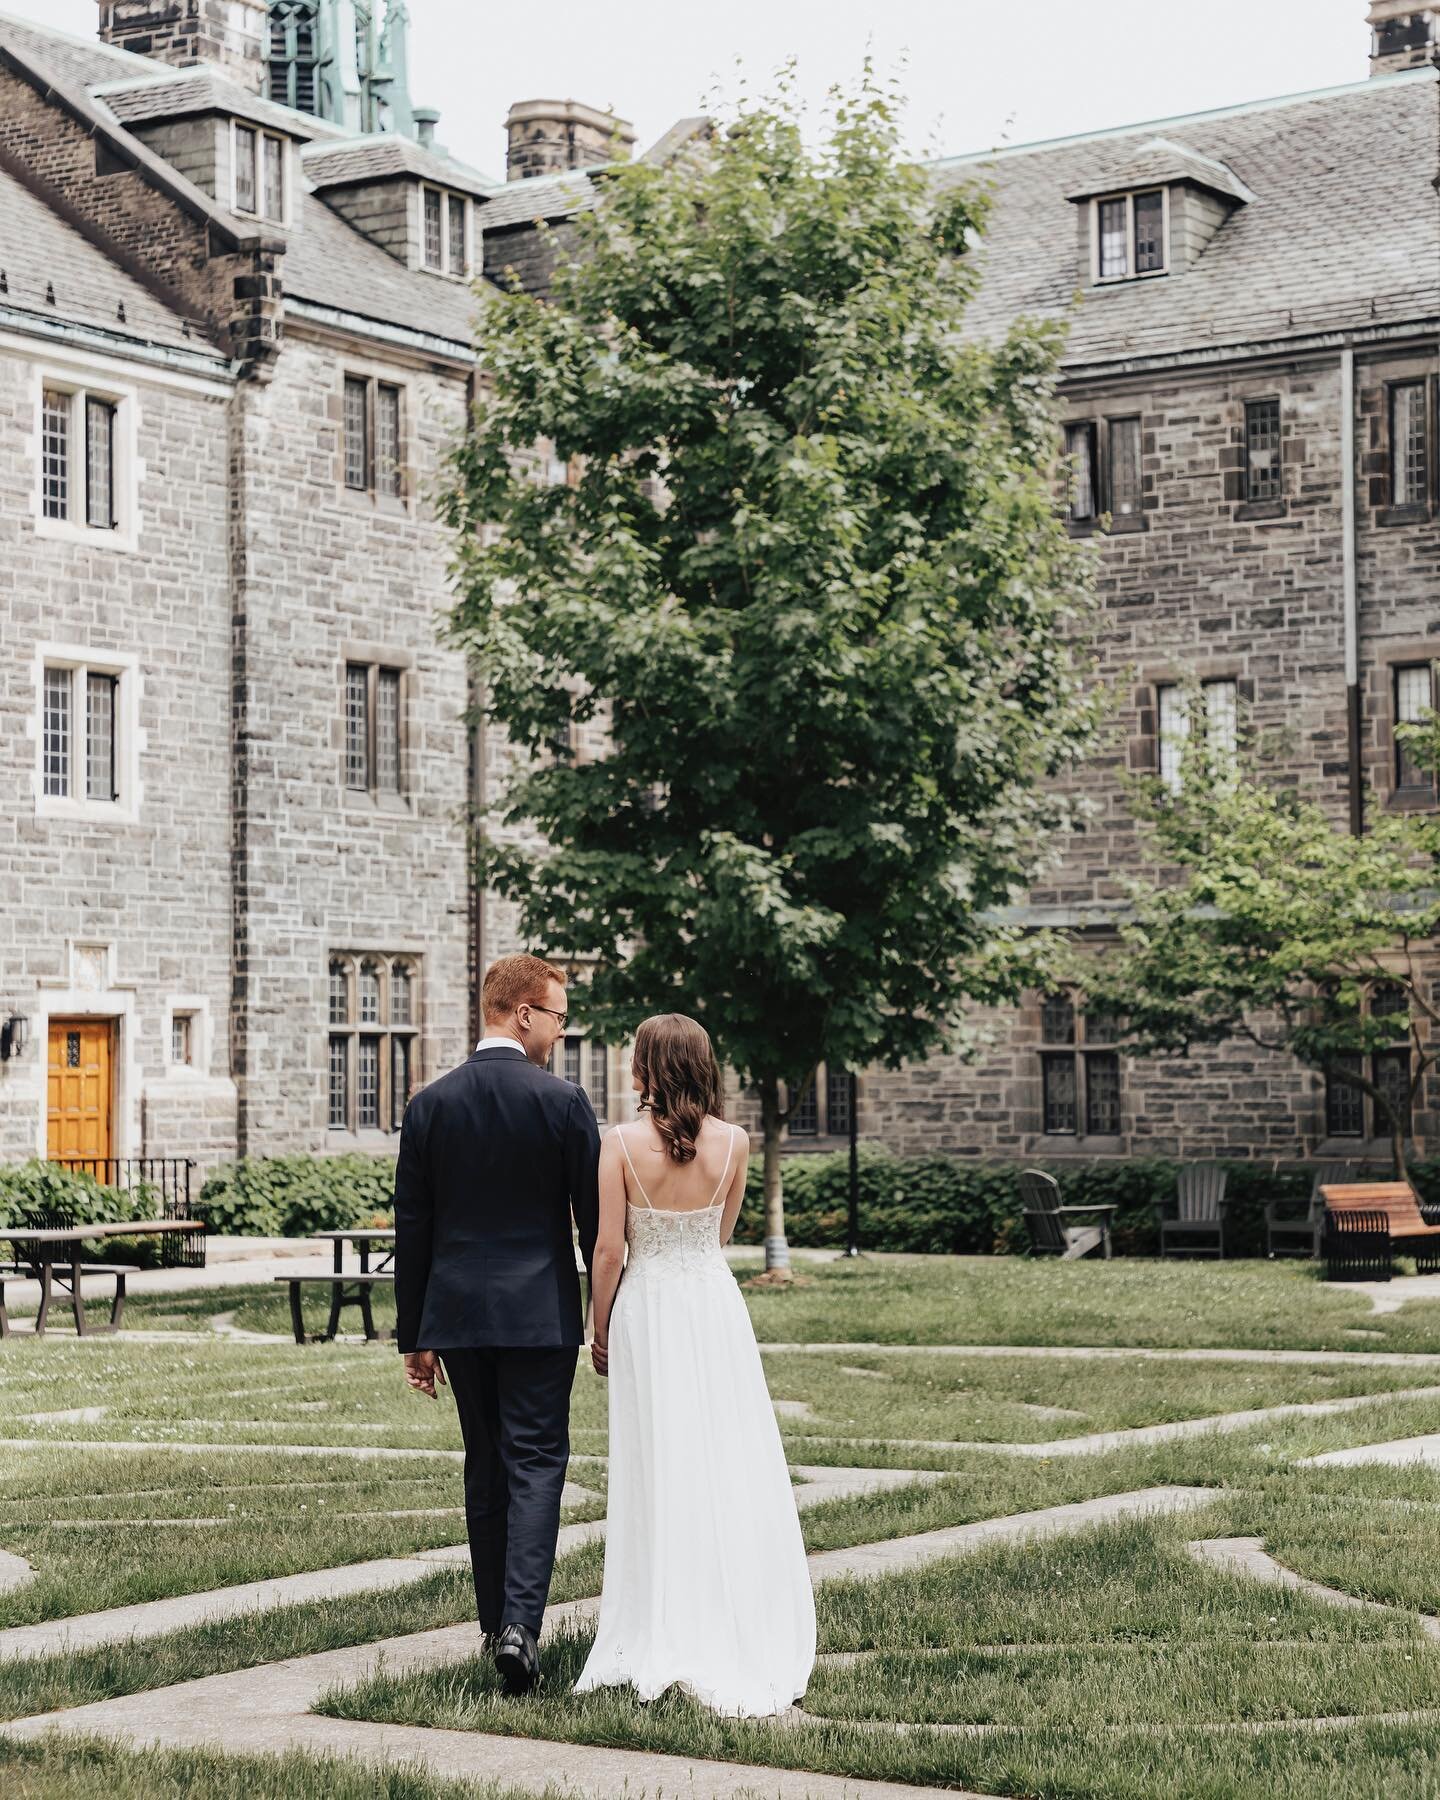 Taking it back to Kate + Patrick&rsquo;s special day, I can&rsquo;t believe their 1 year anniversary is almost coming up! Time flies by way too fast, seriously how do we slow it down?!

I absolutely loved shooting at this location, these two made suc